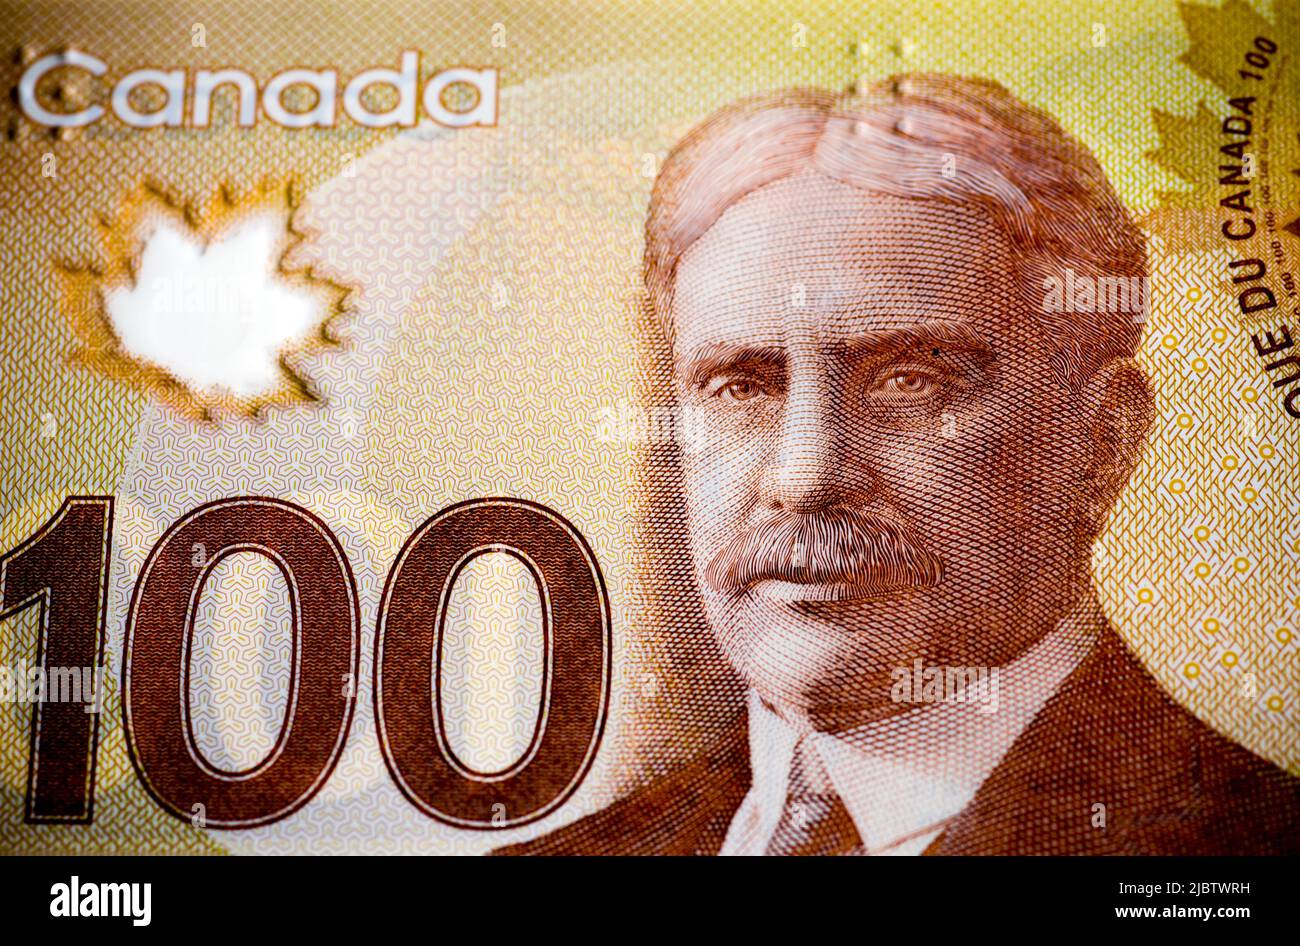 Detail of the Canadian 100 dollar bill, featuring the face of Sir Robert Borden (1854-1937), who was prime minister of Canada during World War I (1914 Stock Photo